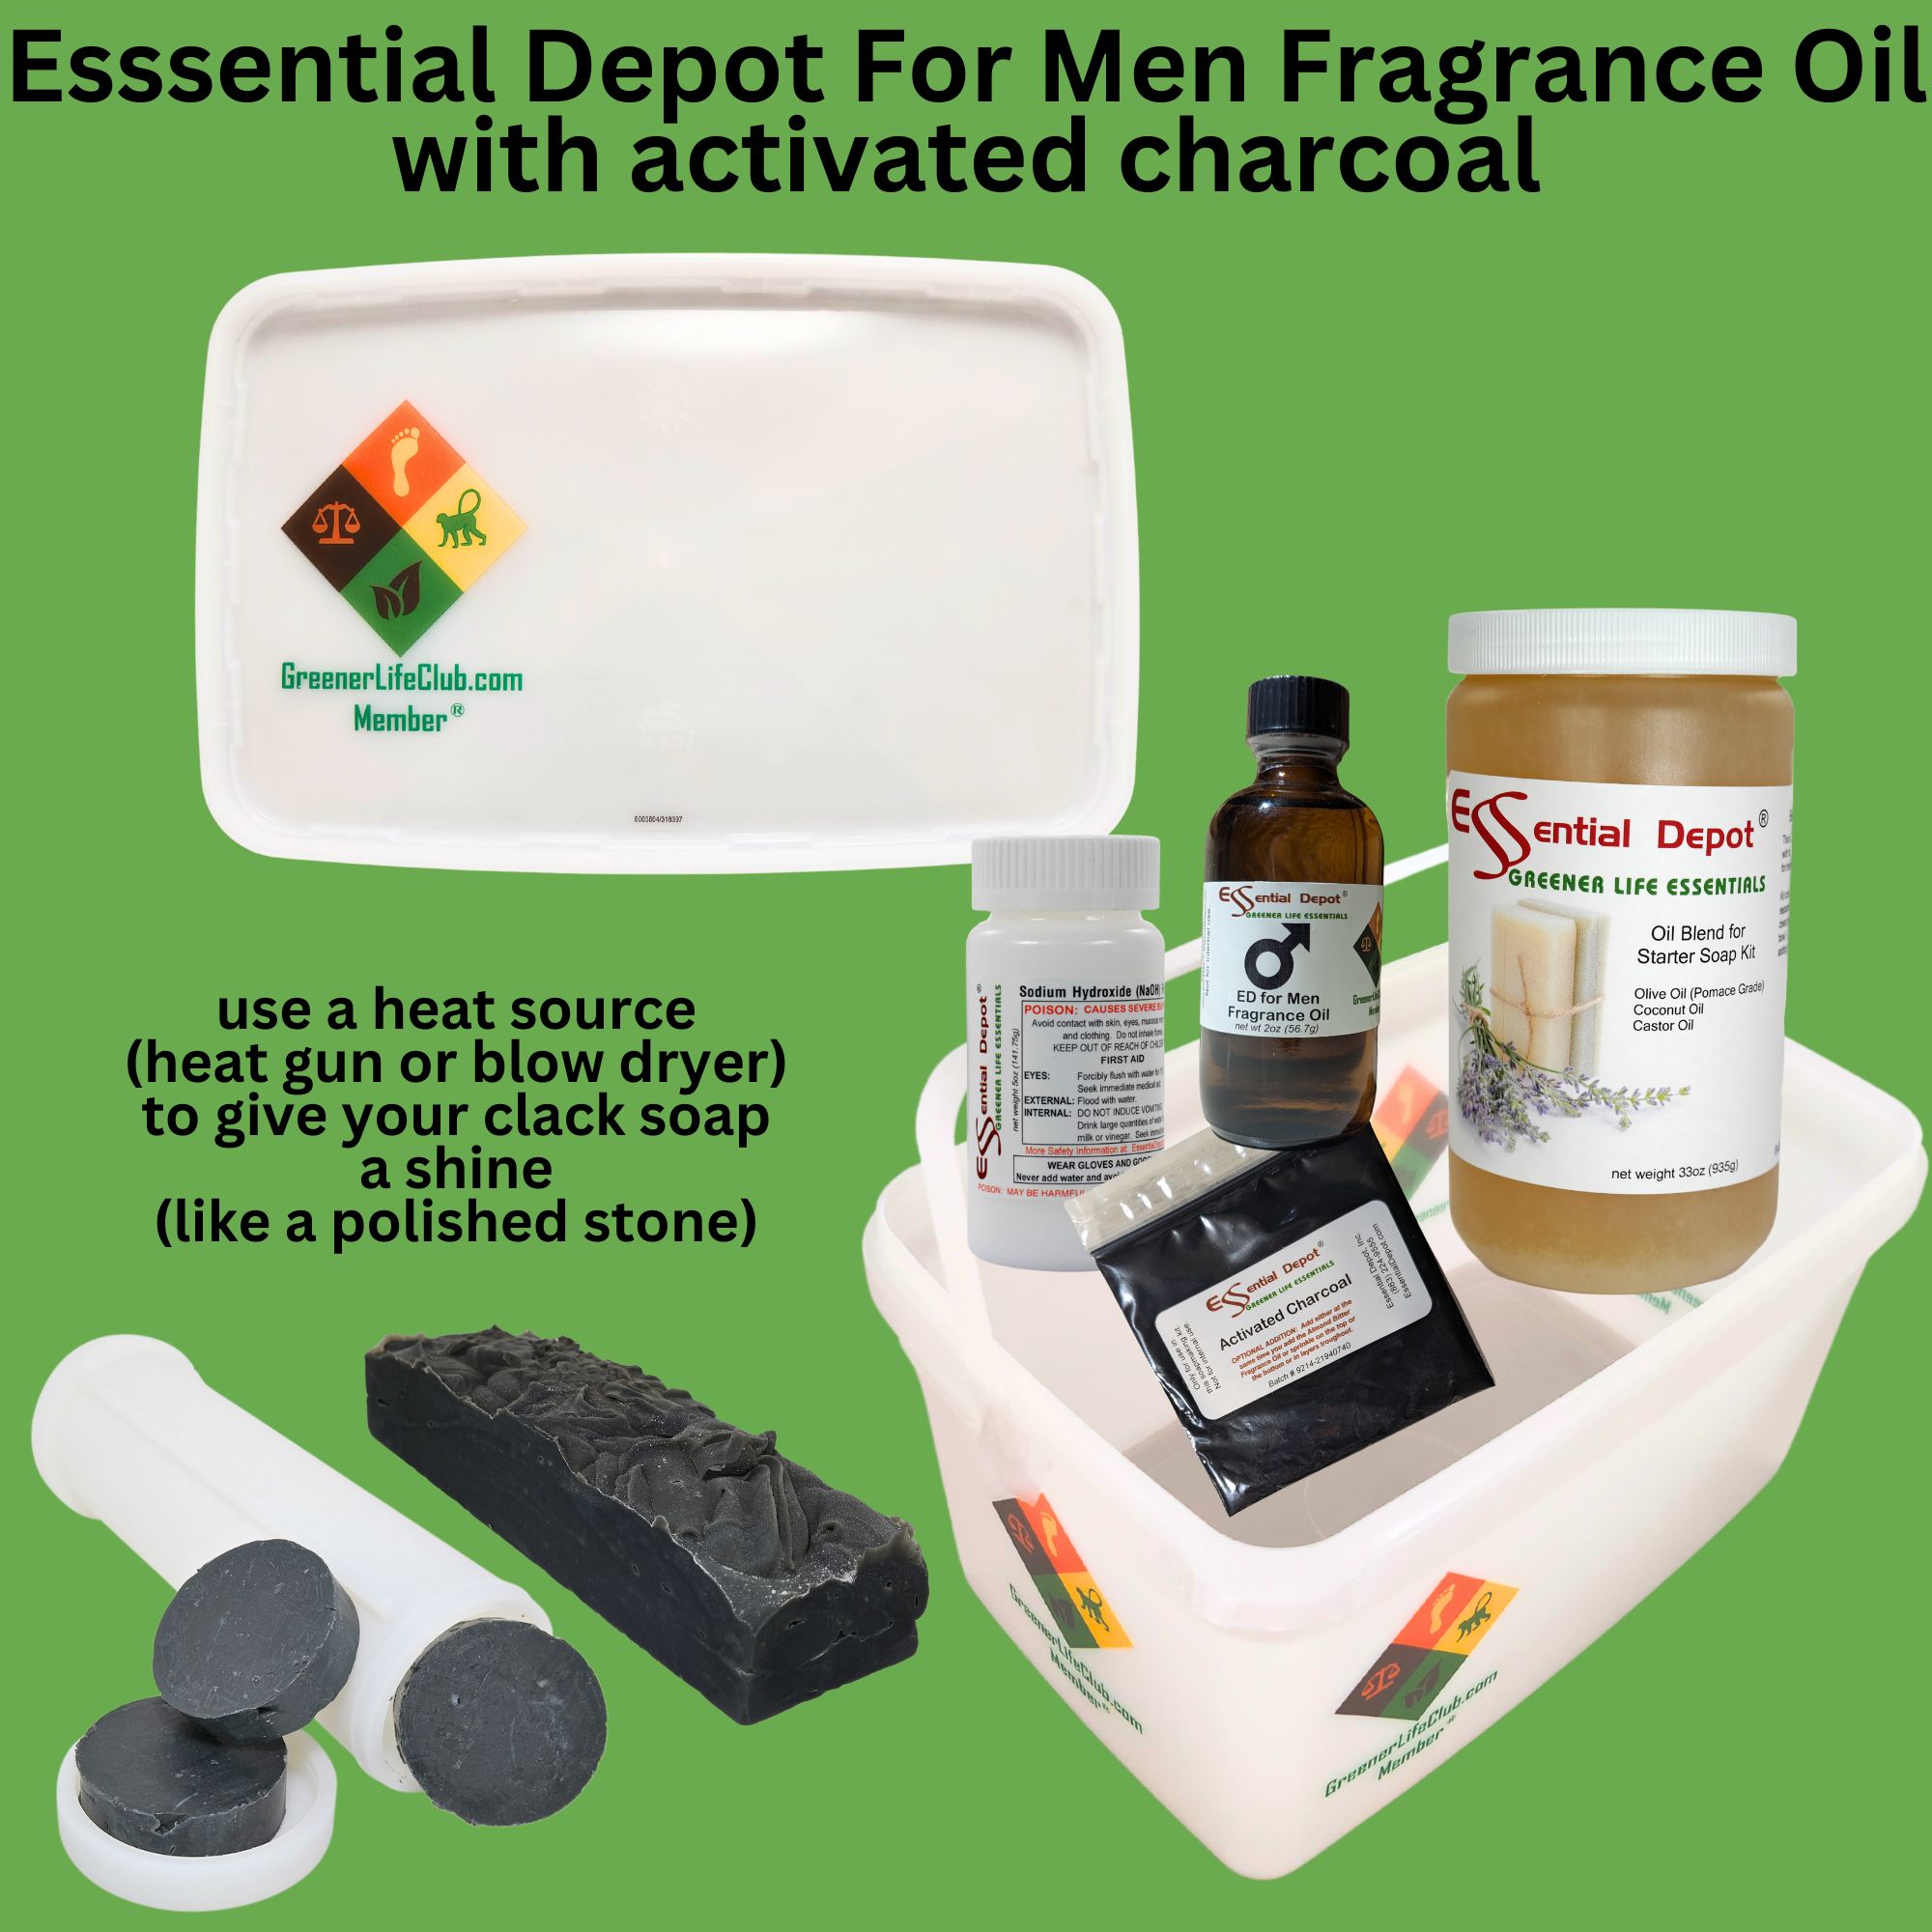 Essential Depot for Men with Activated Charcoal